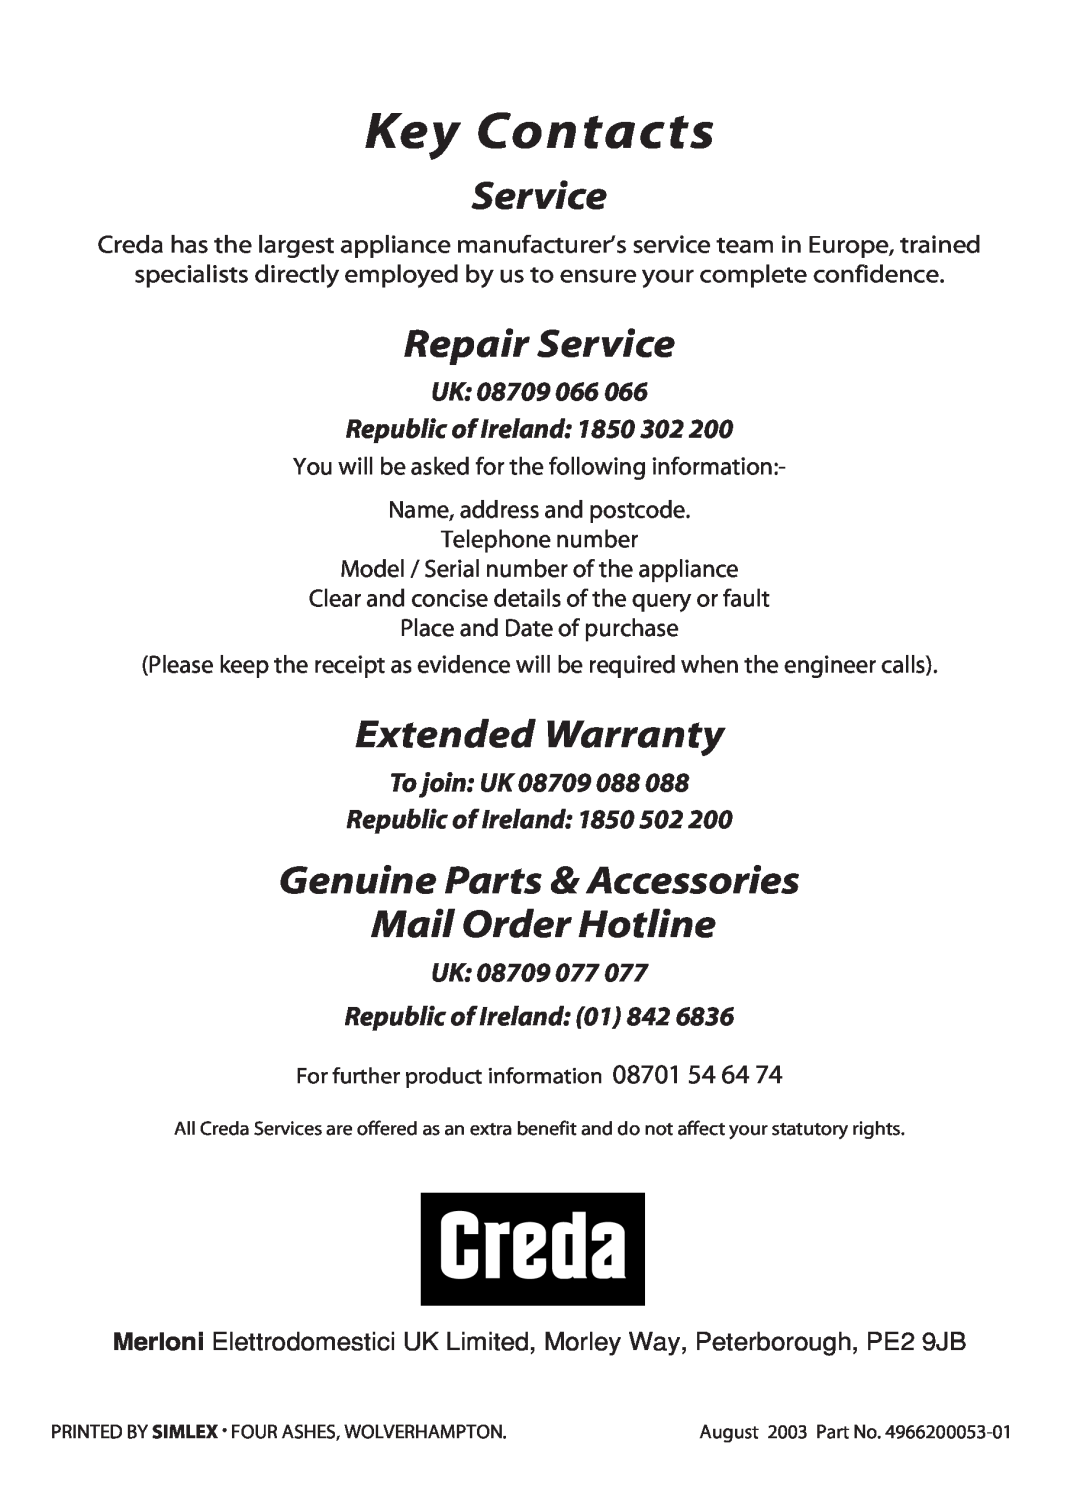 Creda X153 Key Contacts, Repair Service, Extended Warranty, Genuine Parts & Accessories Mail Order Hotline, To join UK 